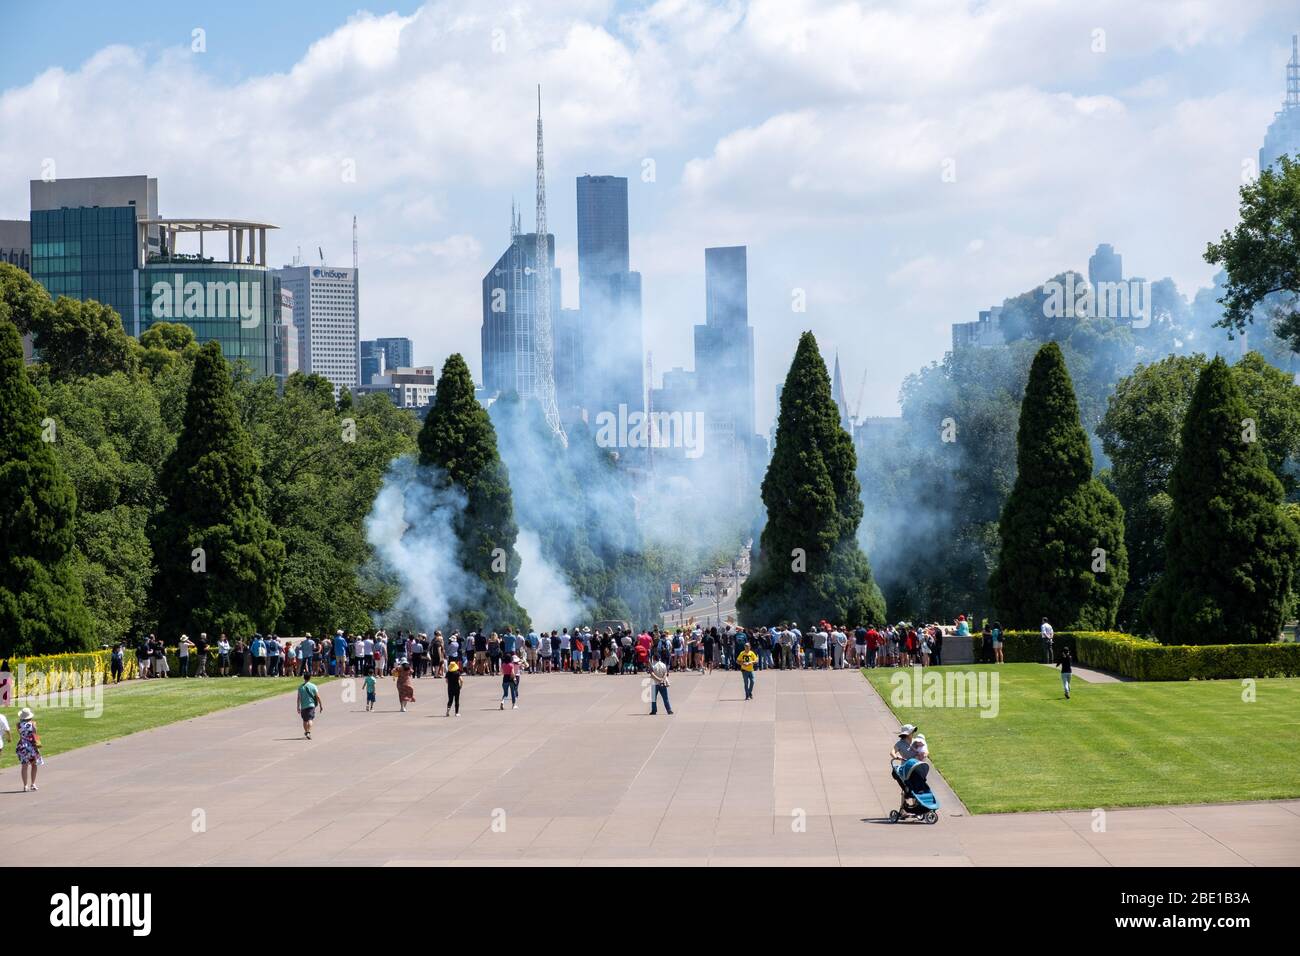 Melbourne, Australia - January 26, 2020: Tourists gather to watch cannon fire on Shrine of Remembrance promenade on Australia Day Stock Photo